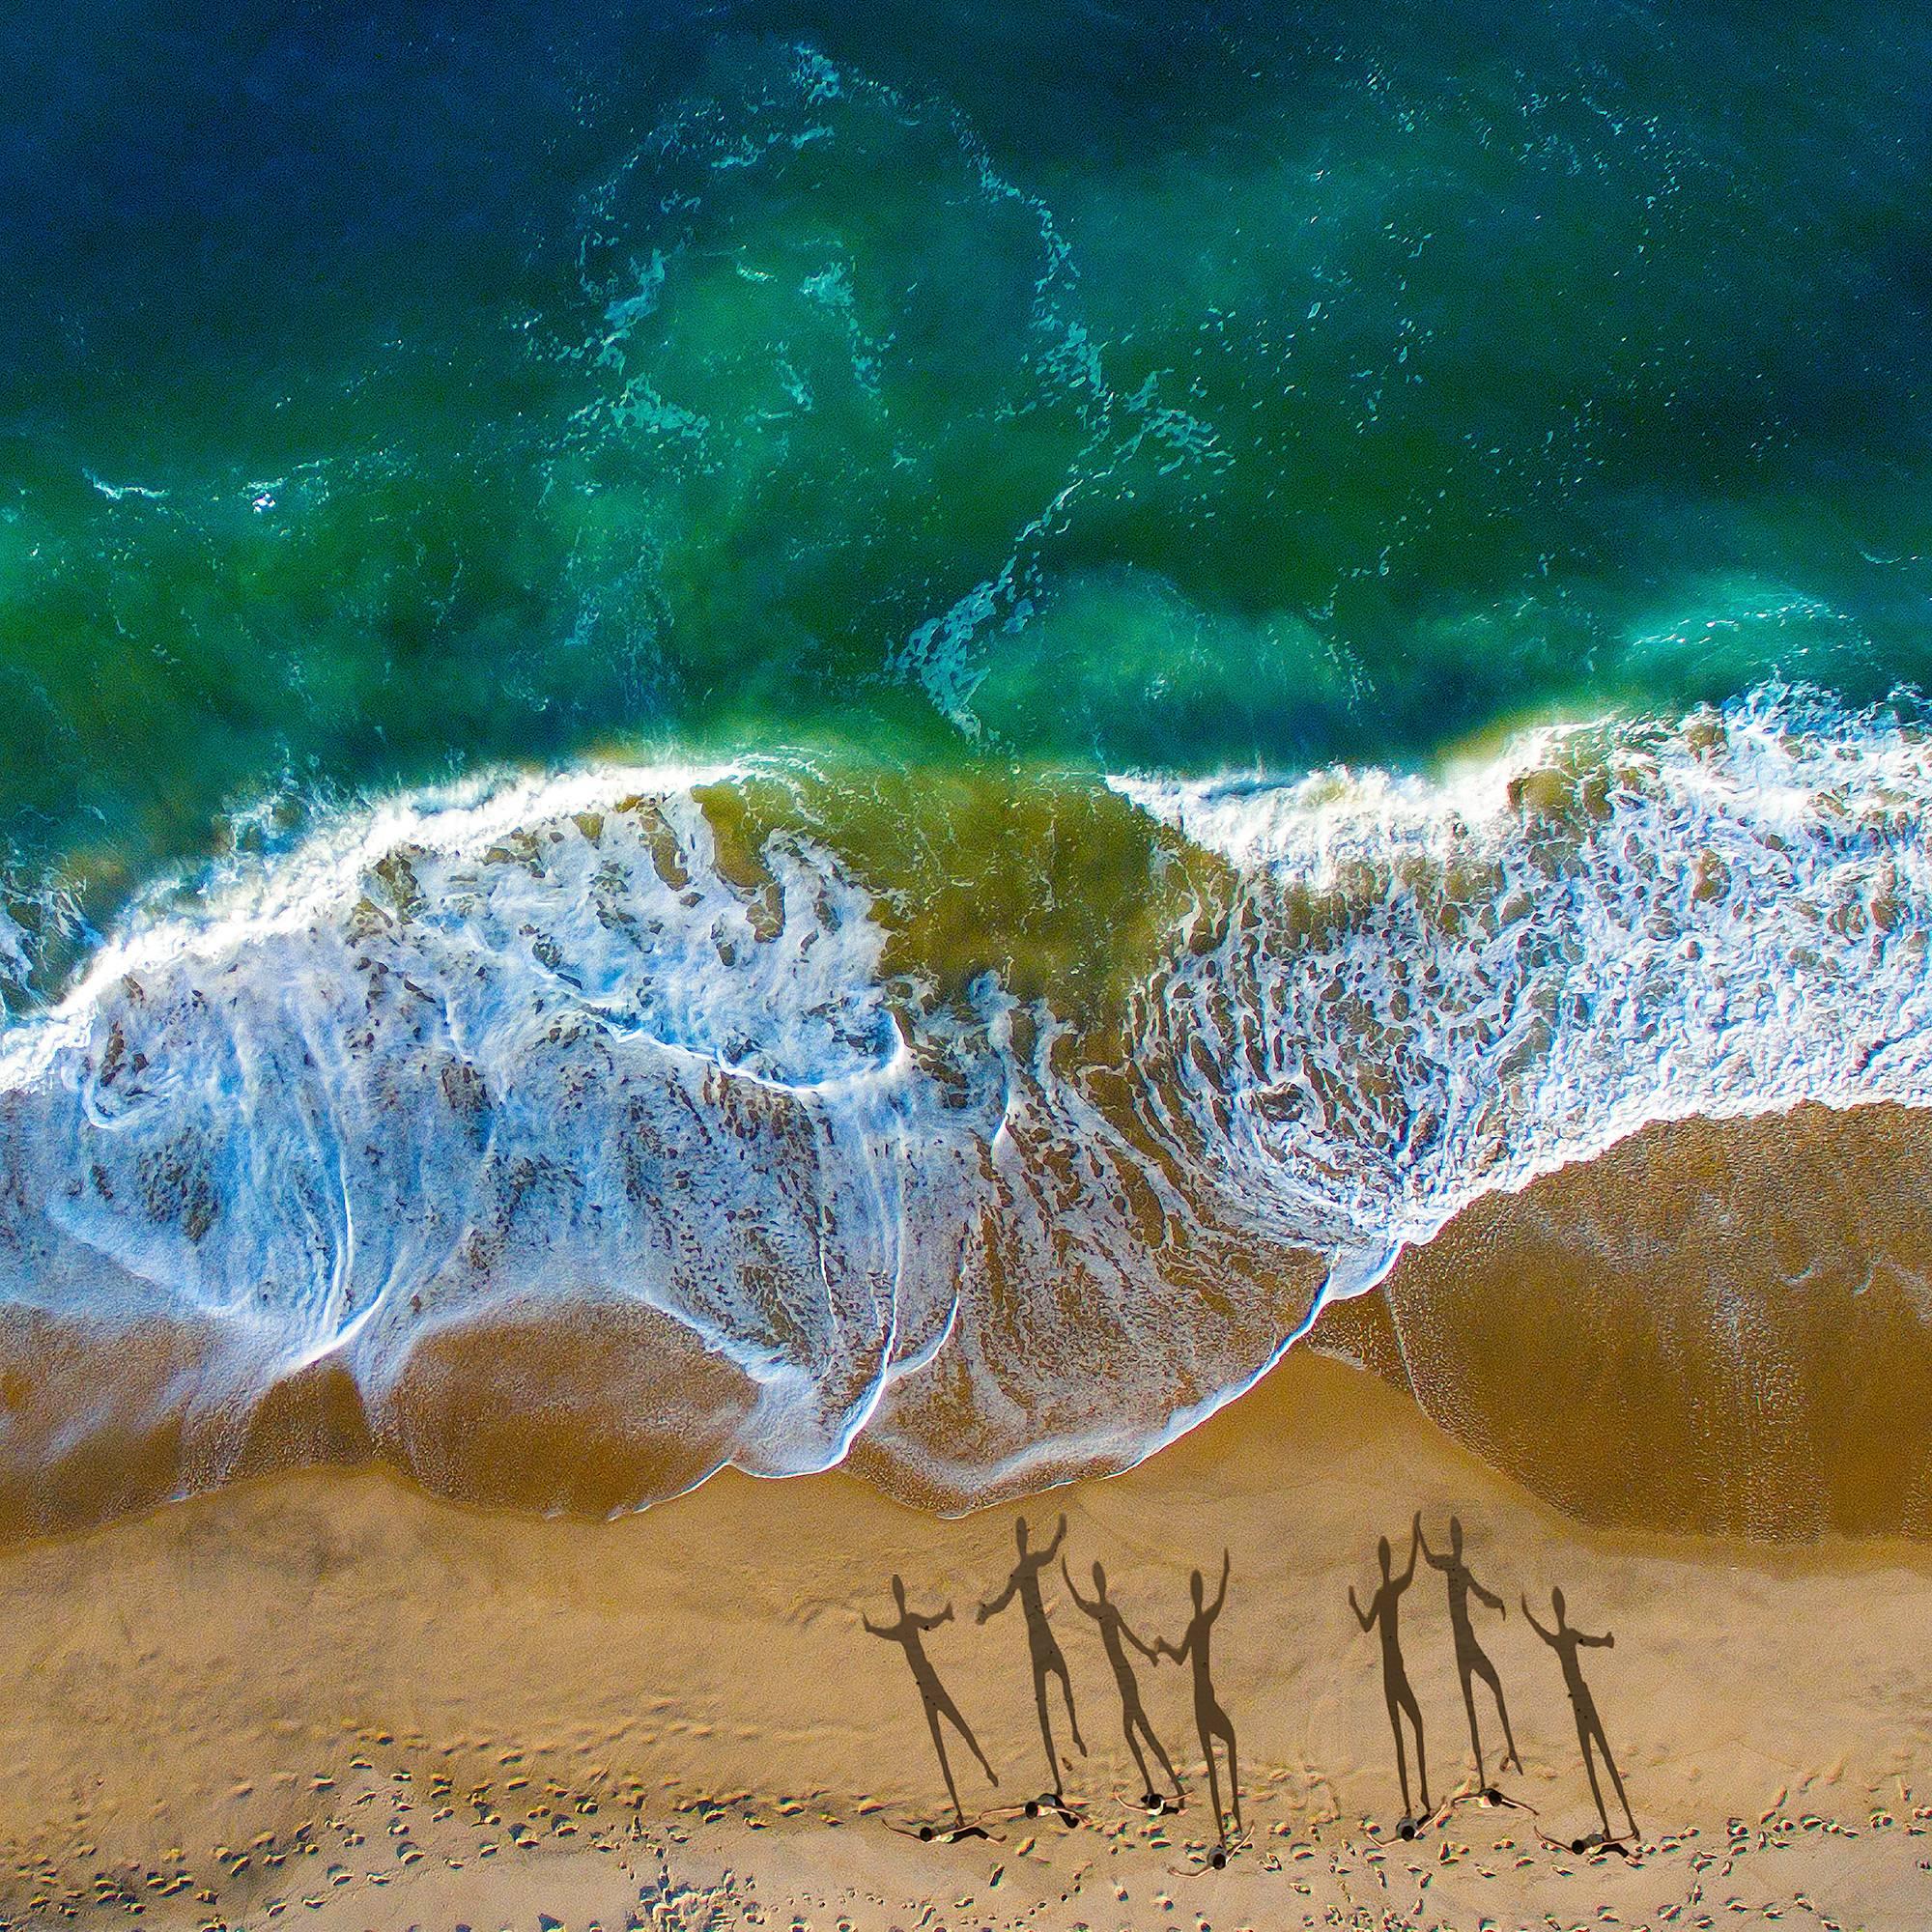 Albert Delamour Landscape Photograph - Aerial view with shadows of people walking on the beach, Montauk